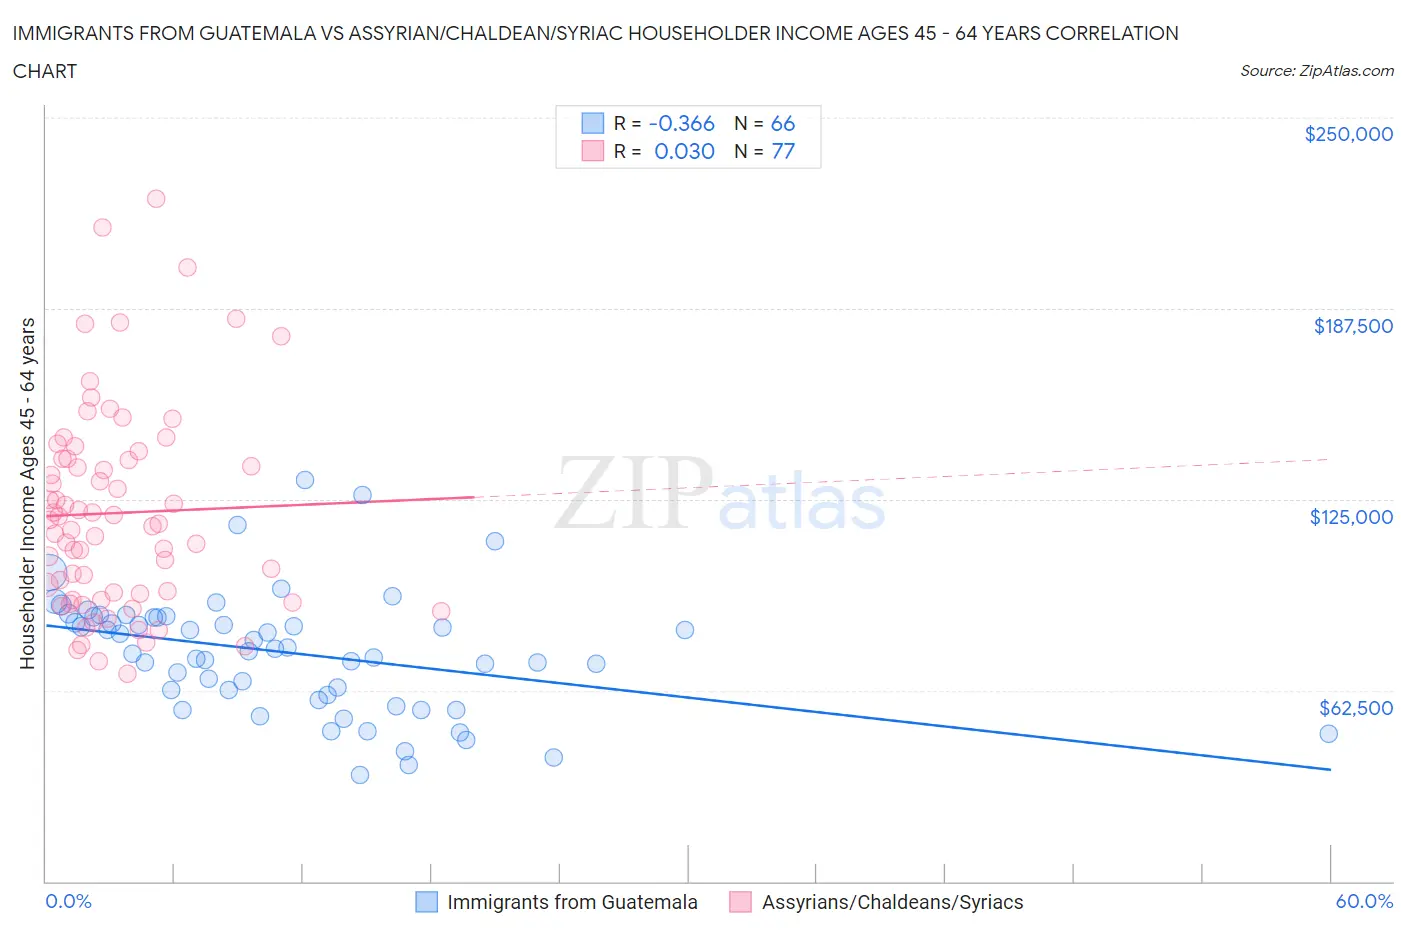 Immigrants from Guatemala vs Assyrian/Chaldean/Syriac Householder Income Ages 45 - 64 years